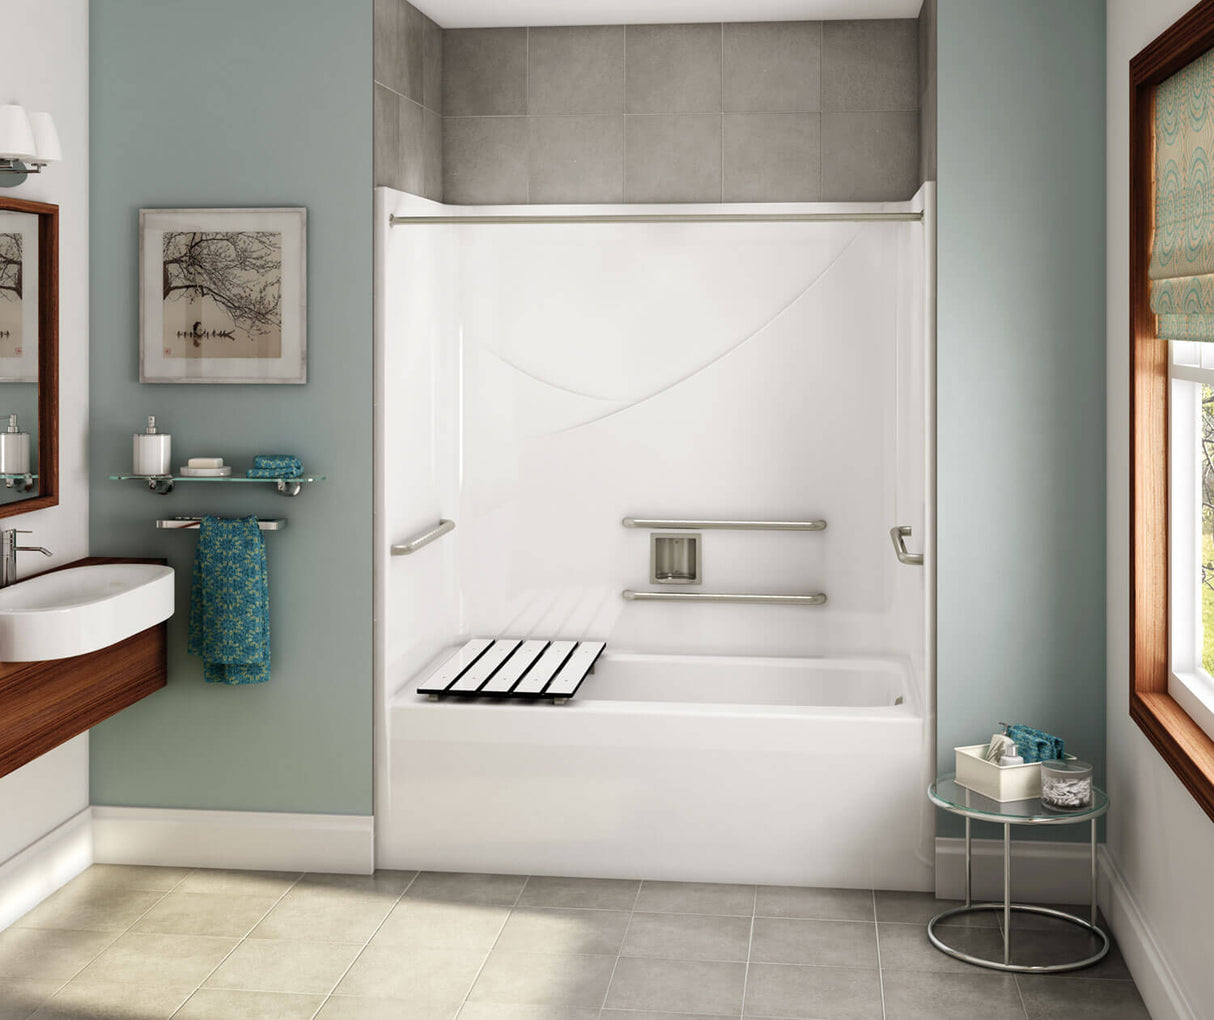 MAAX 106060-000-002-104 OPTS-6032 - ADA Grab Bars and Seat AcrylX Alcove Left-Hand Drain One-Piece Tub Shower in White